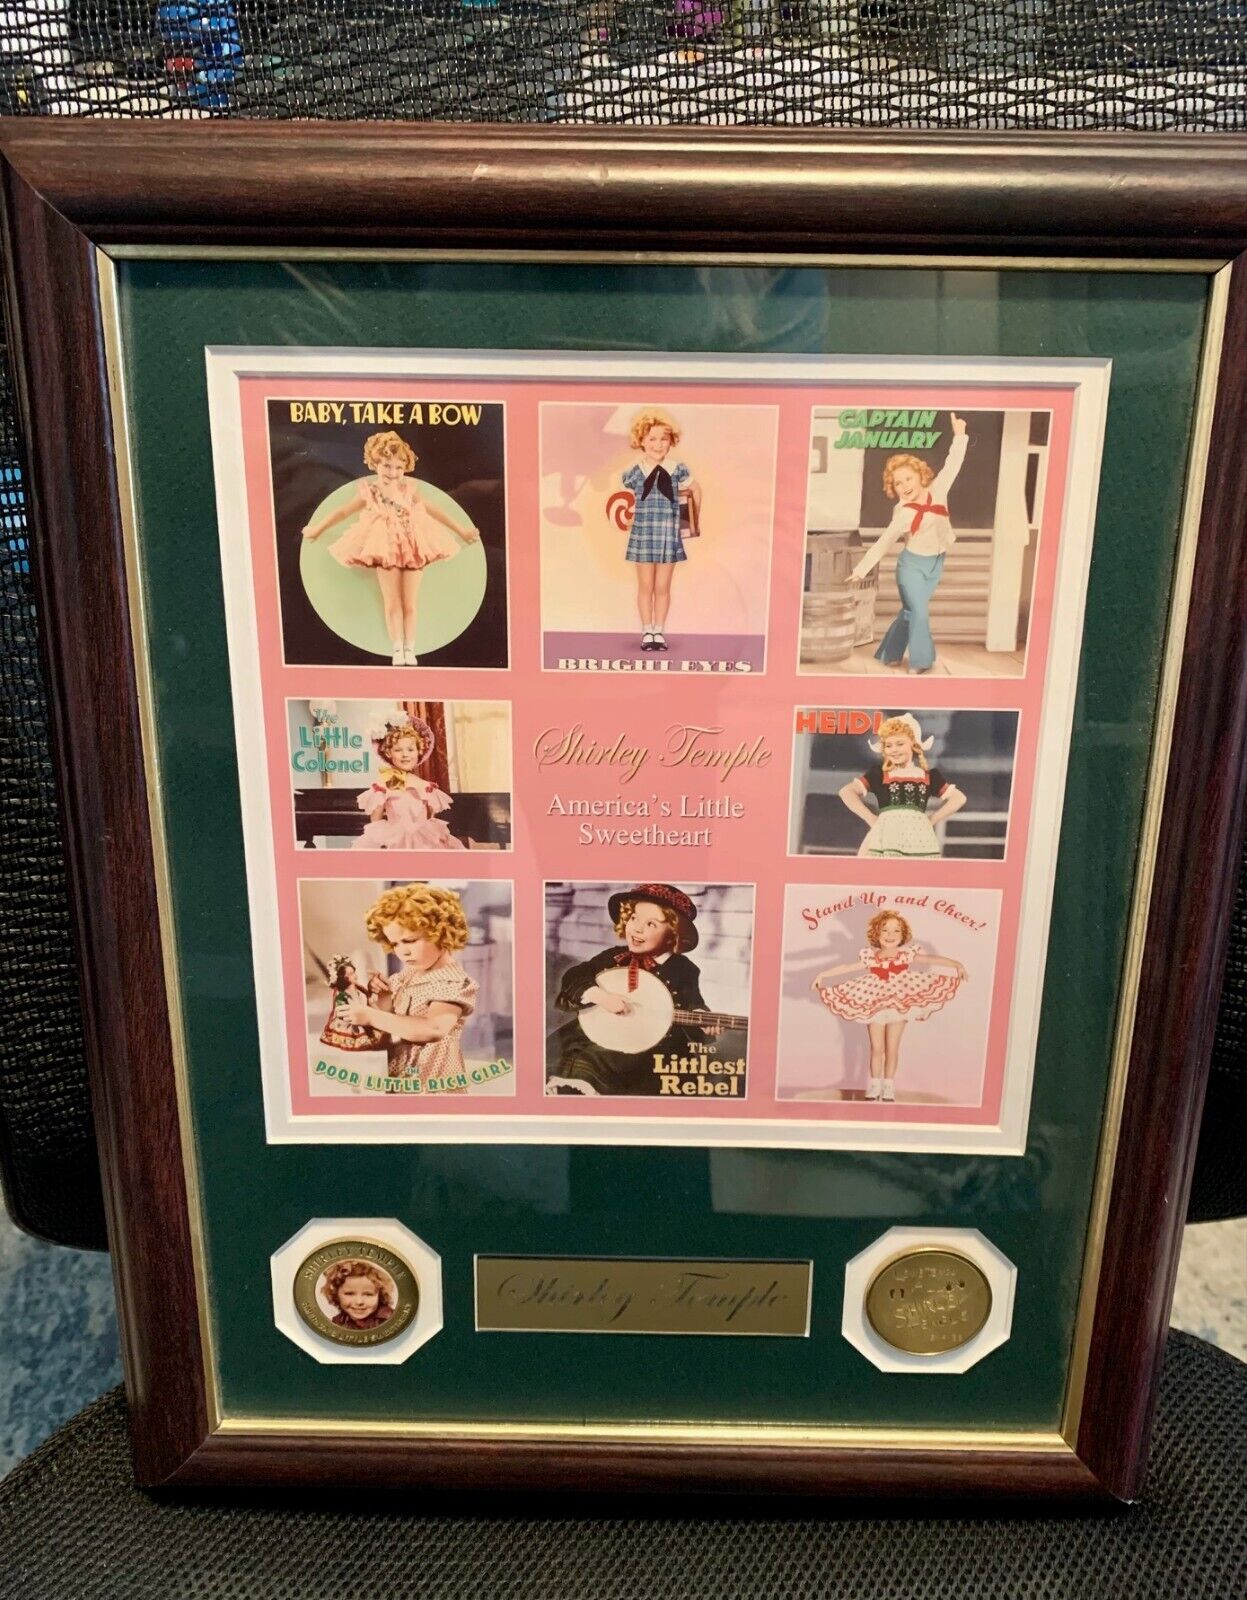 Shirley Temple America’s Little Sweetheart Framed Pictures & Coin 16x12.5